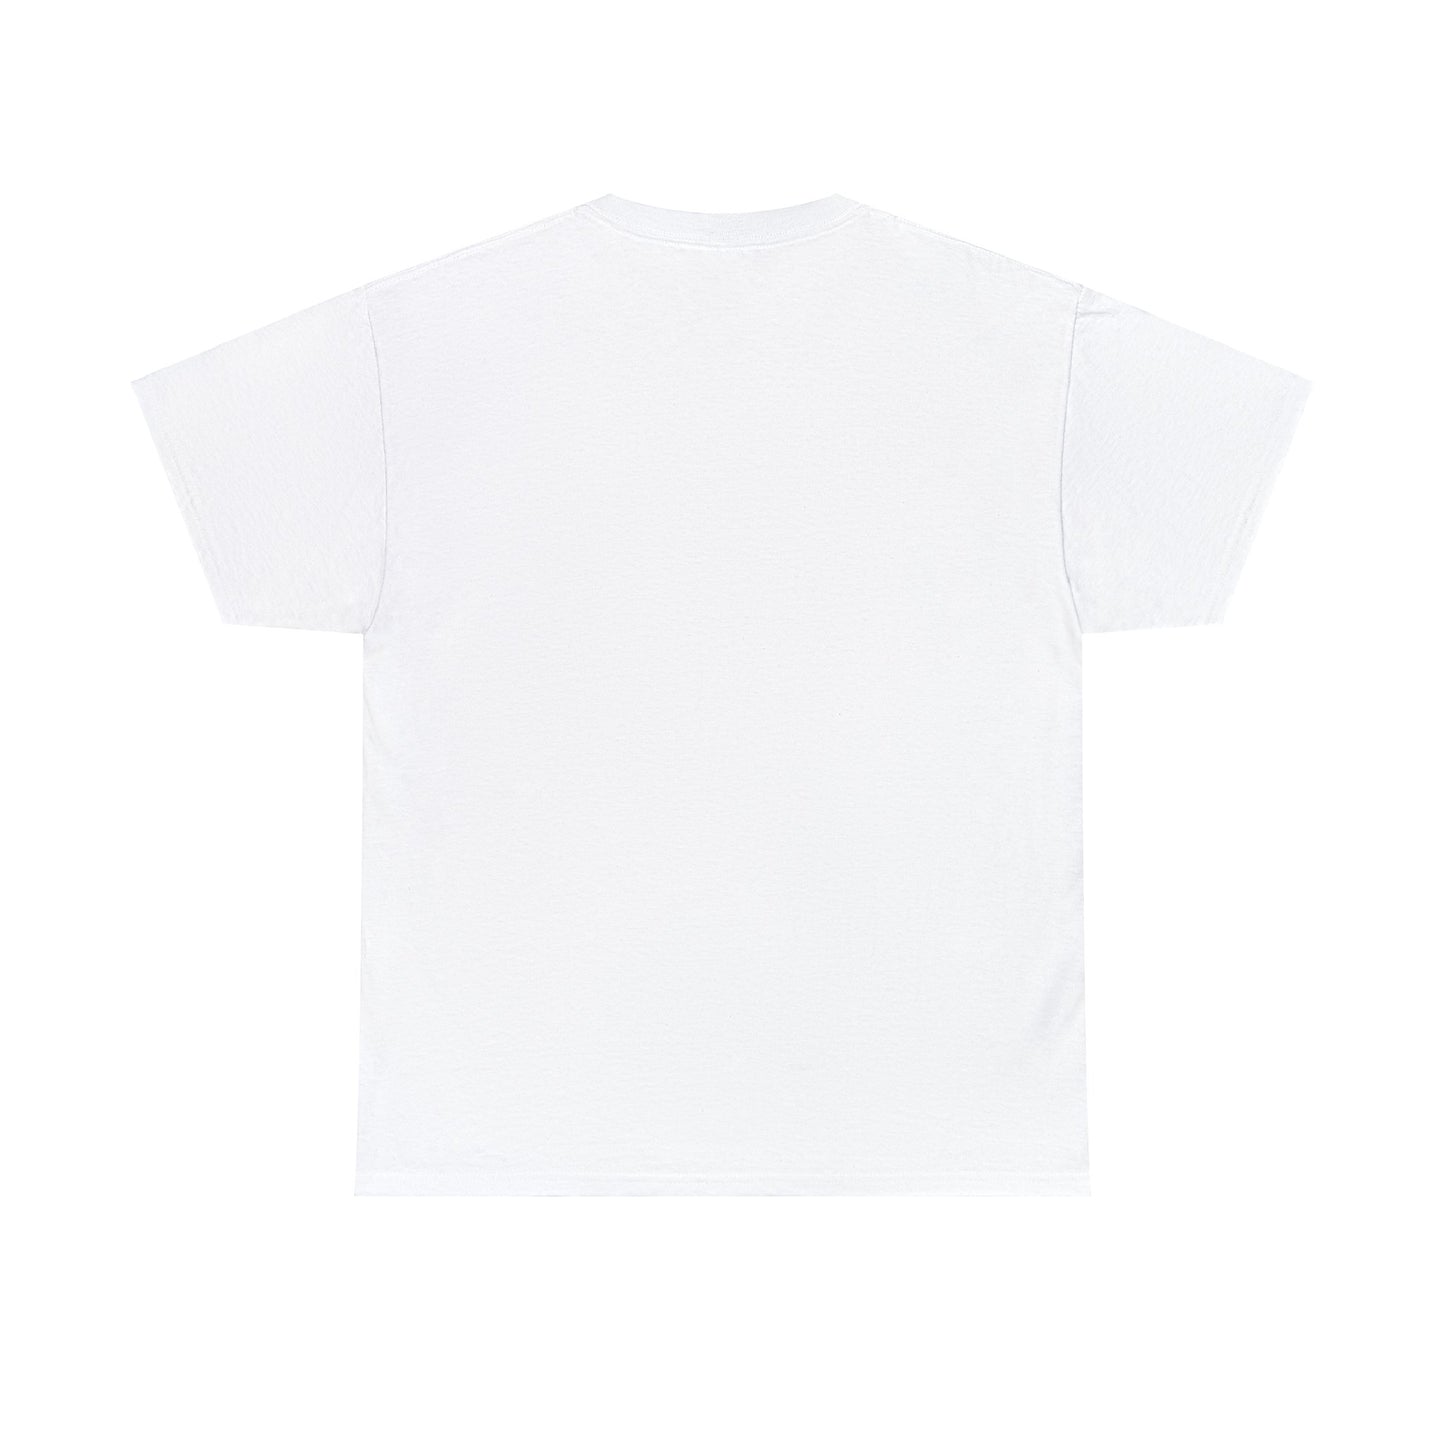 Knowledge Carter Heavy Cotton Tee